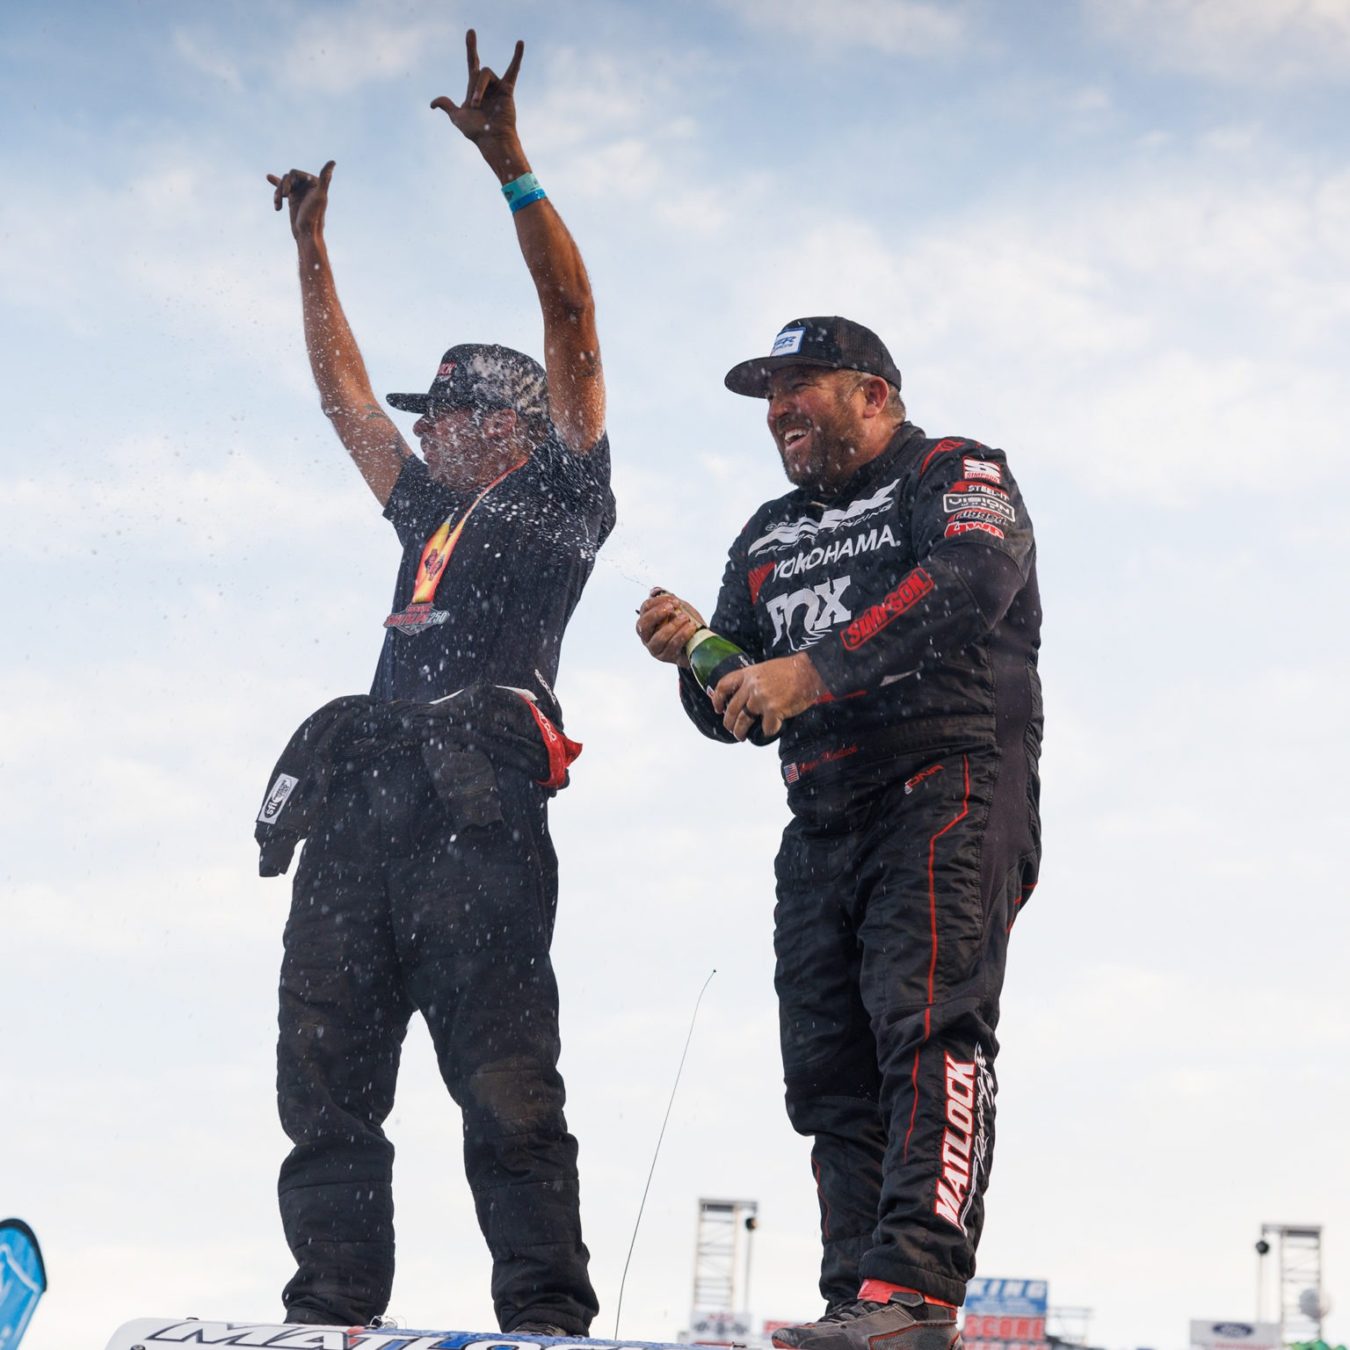 Two men popping a bottle of champagne in celebration of their race win.